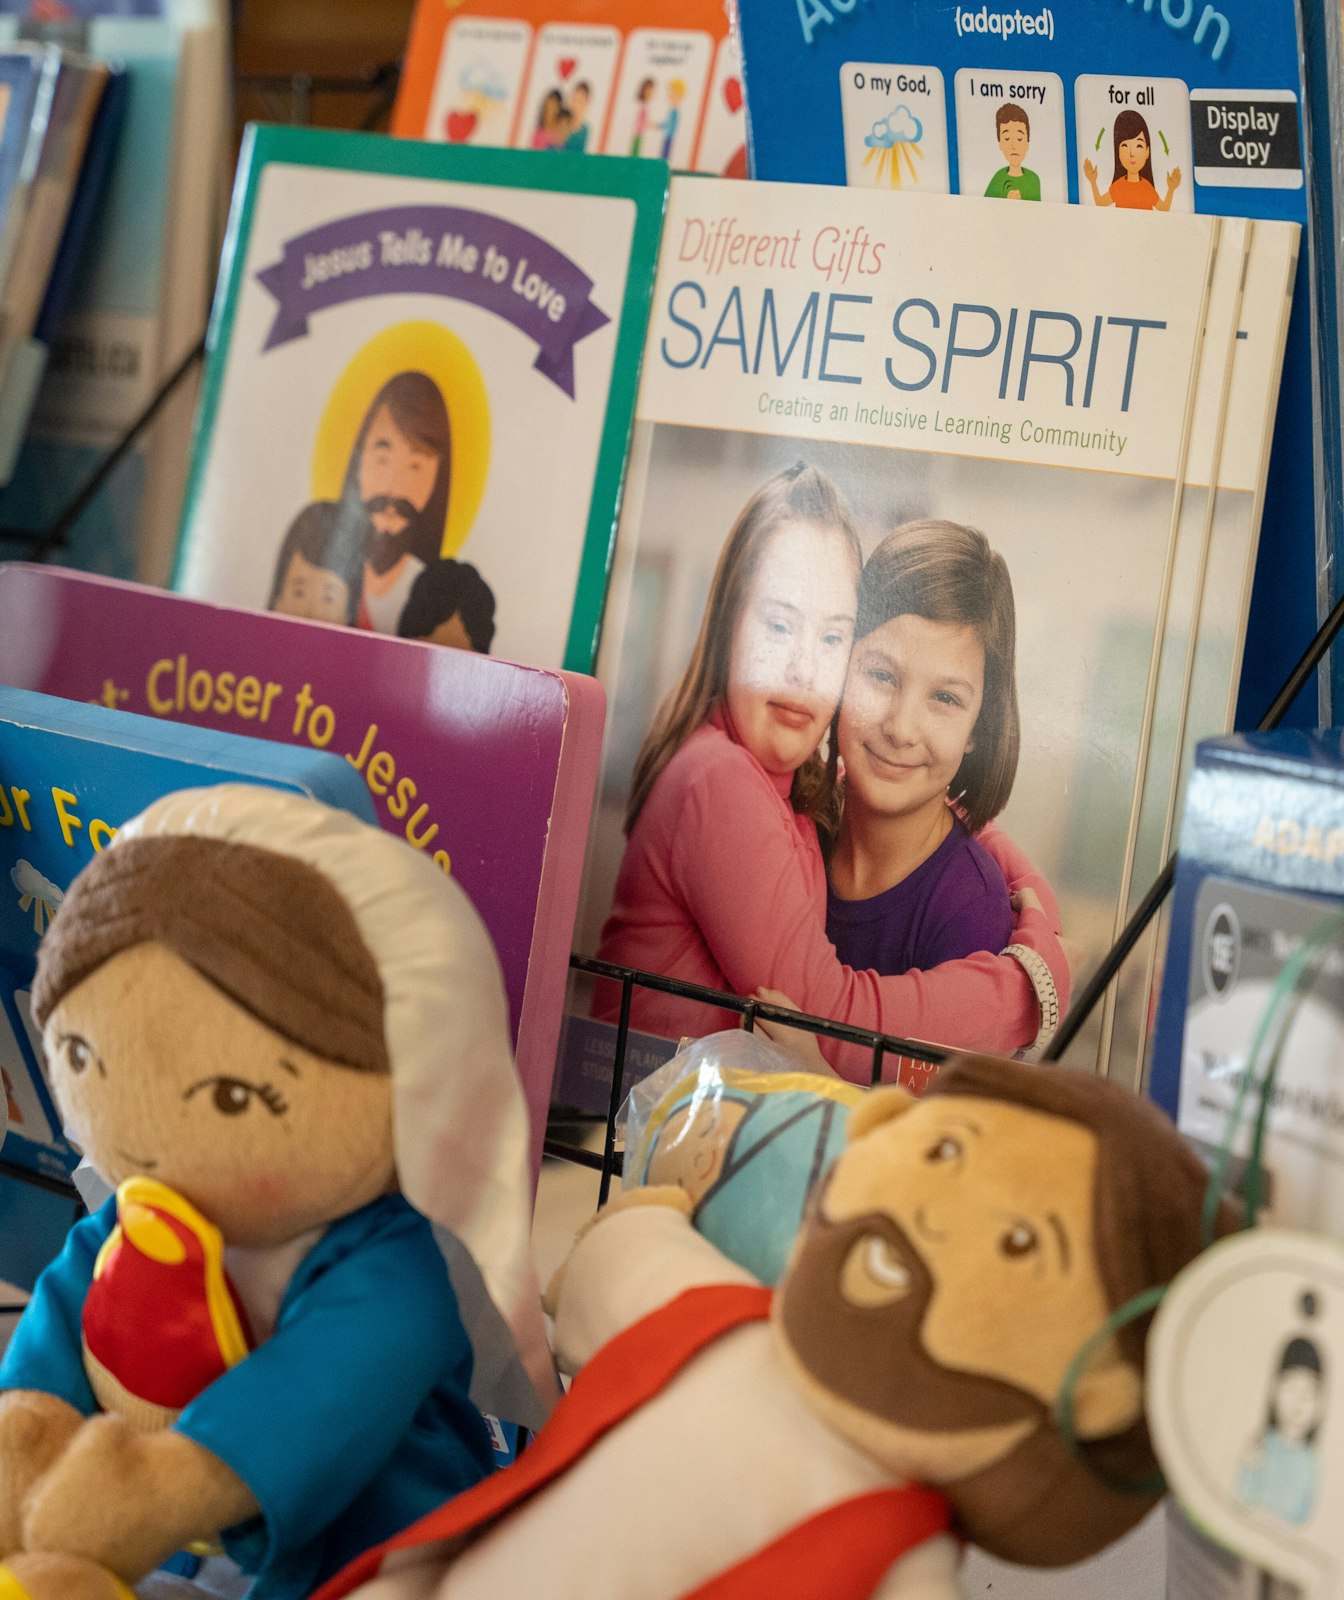 Books and children's toys promoting inclusivity for those with disabilities are pictured at the conference on Aug. 5. (Valaurian Waller | Detroit Catholic)